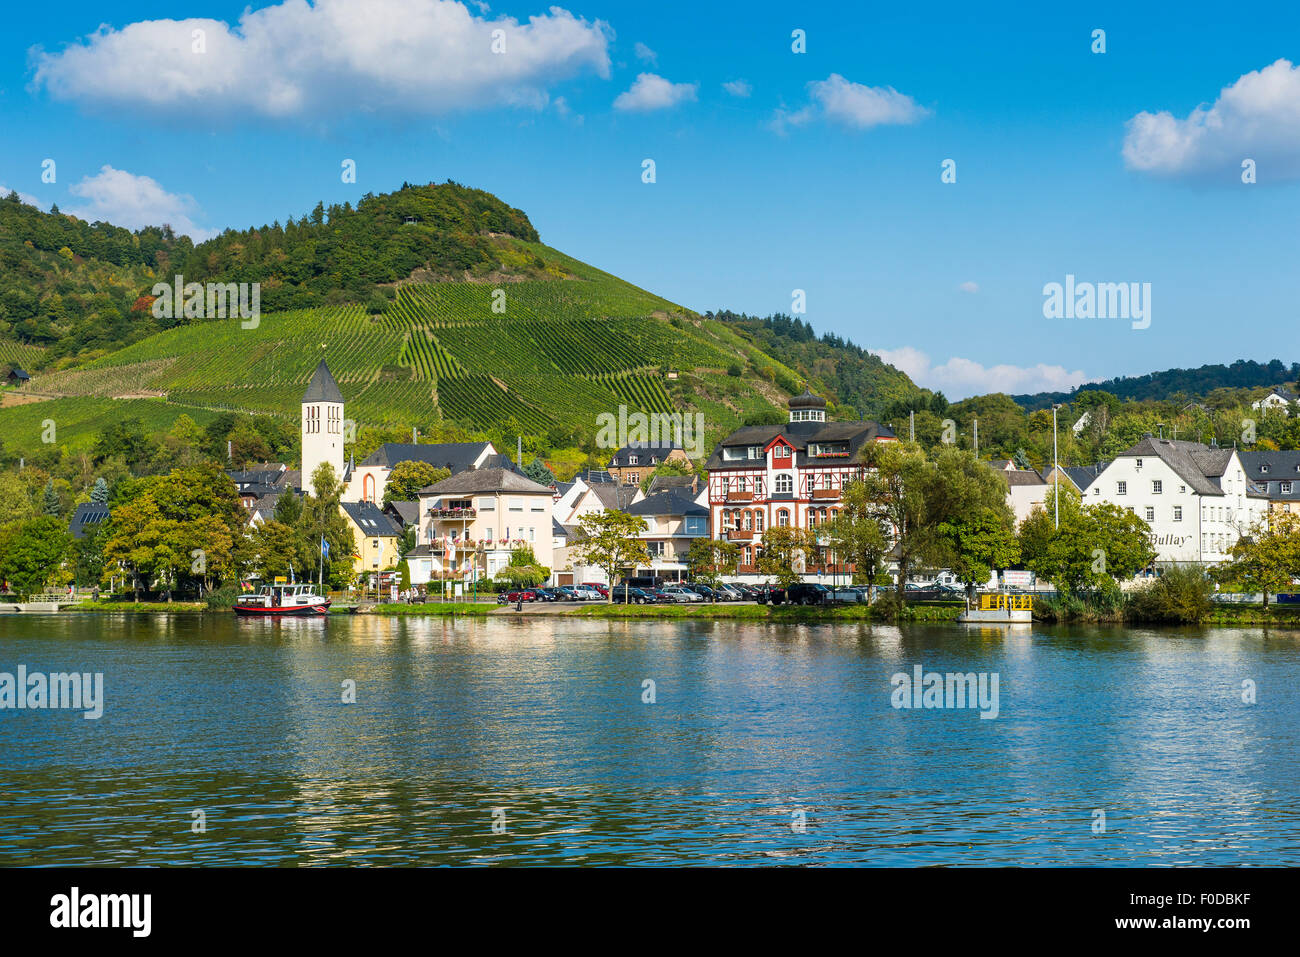 Townscape, Alf, Moselle valley, Rhineland-Palatinate, Germany Stock Photo